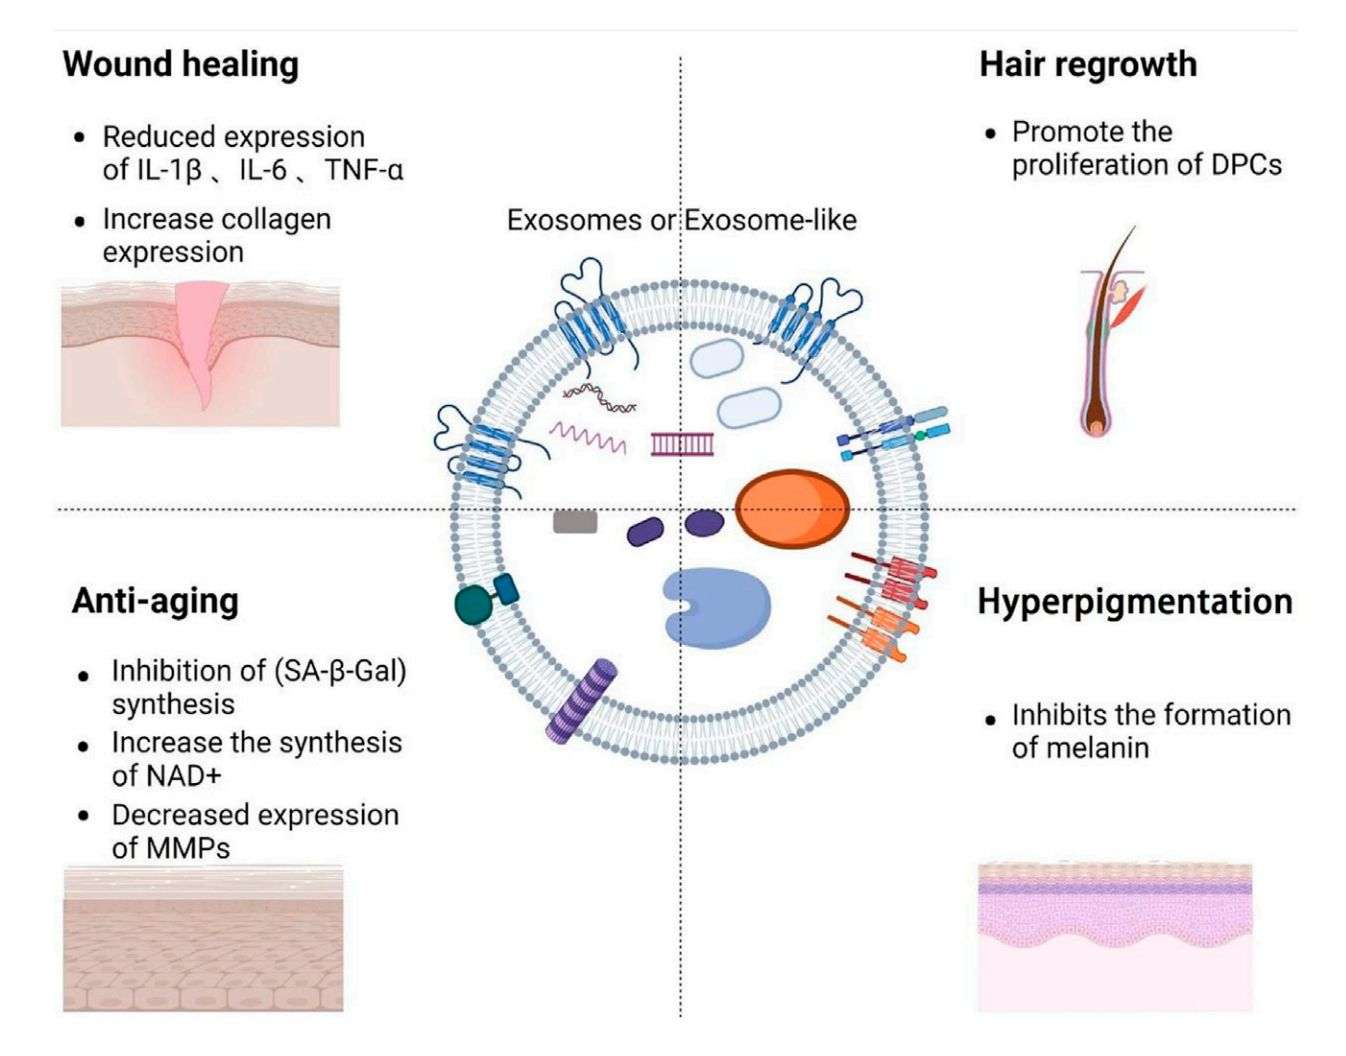 Figure 5. The role of exosomes in medical aesthetics.